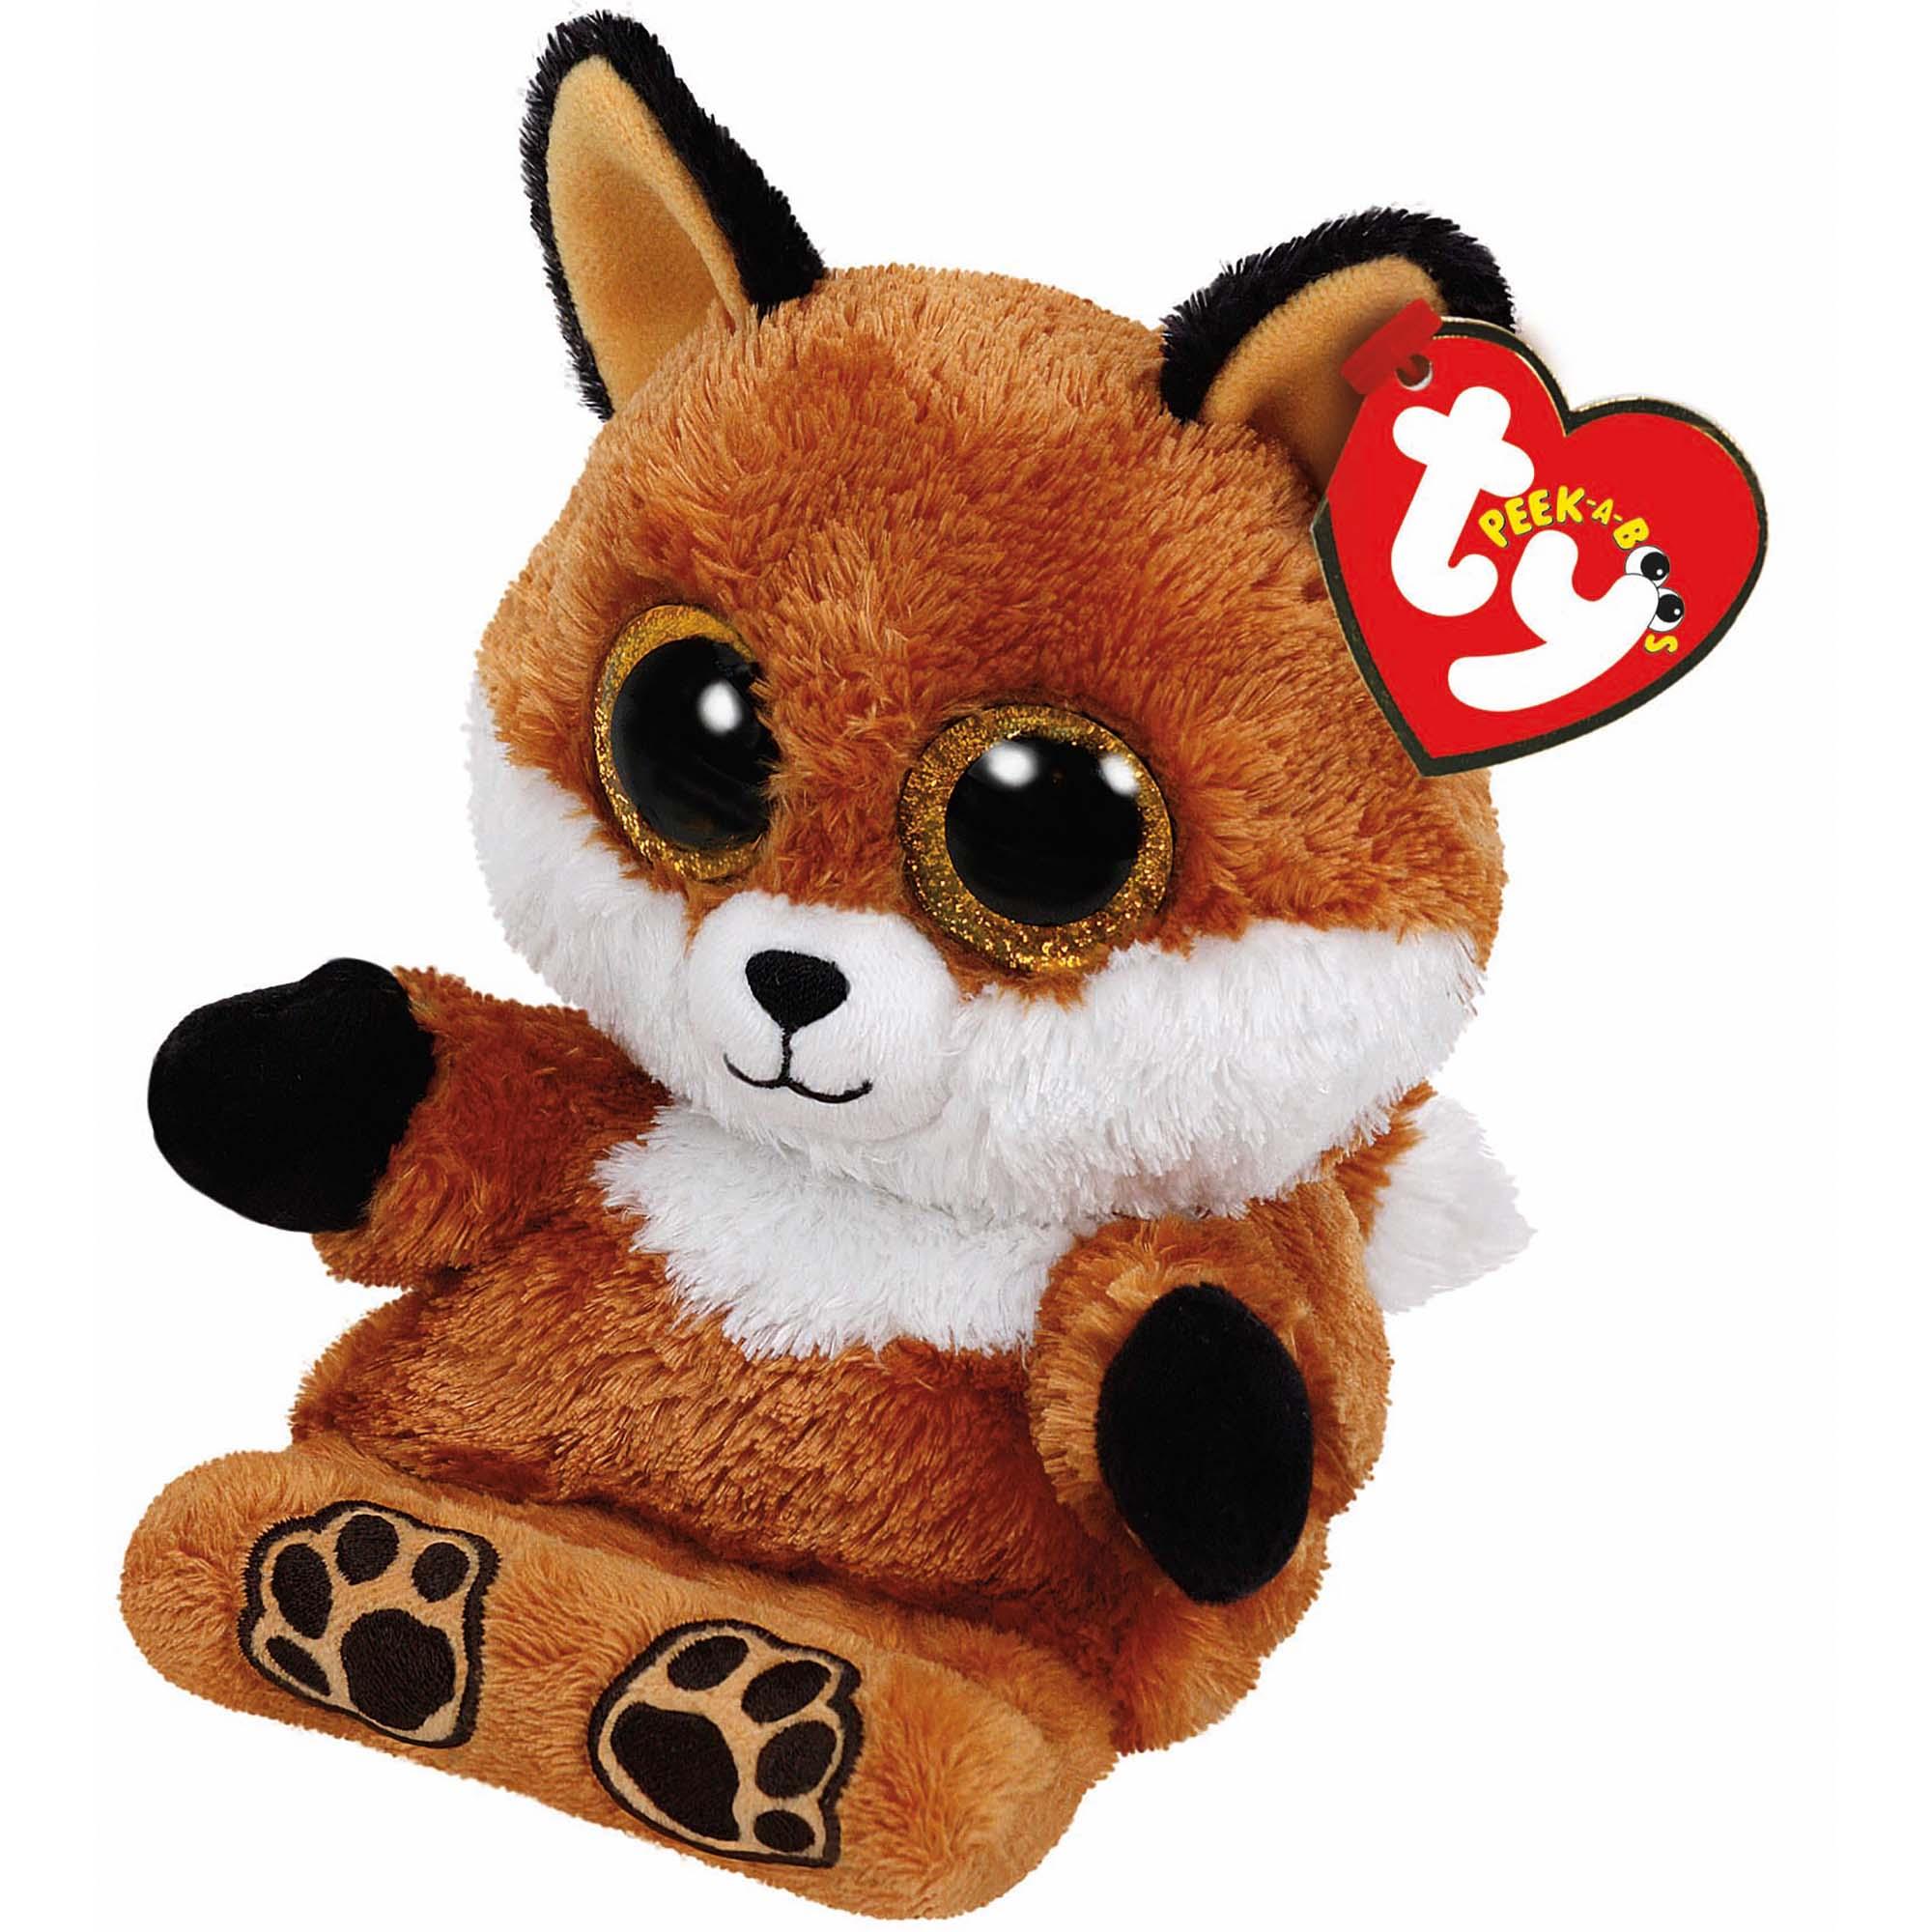 TY Sly Peek-a-Boo - £5.00 - Hamleys for Toys and Games